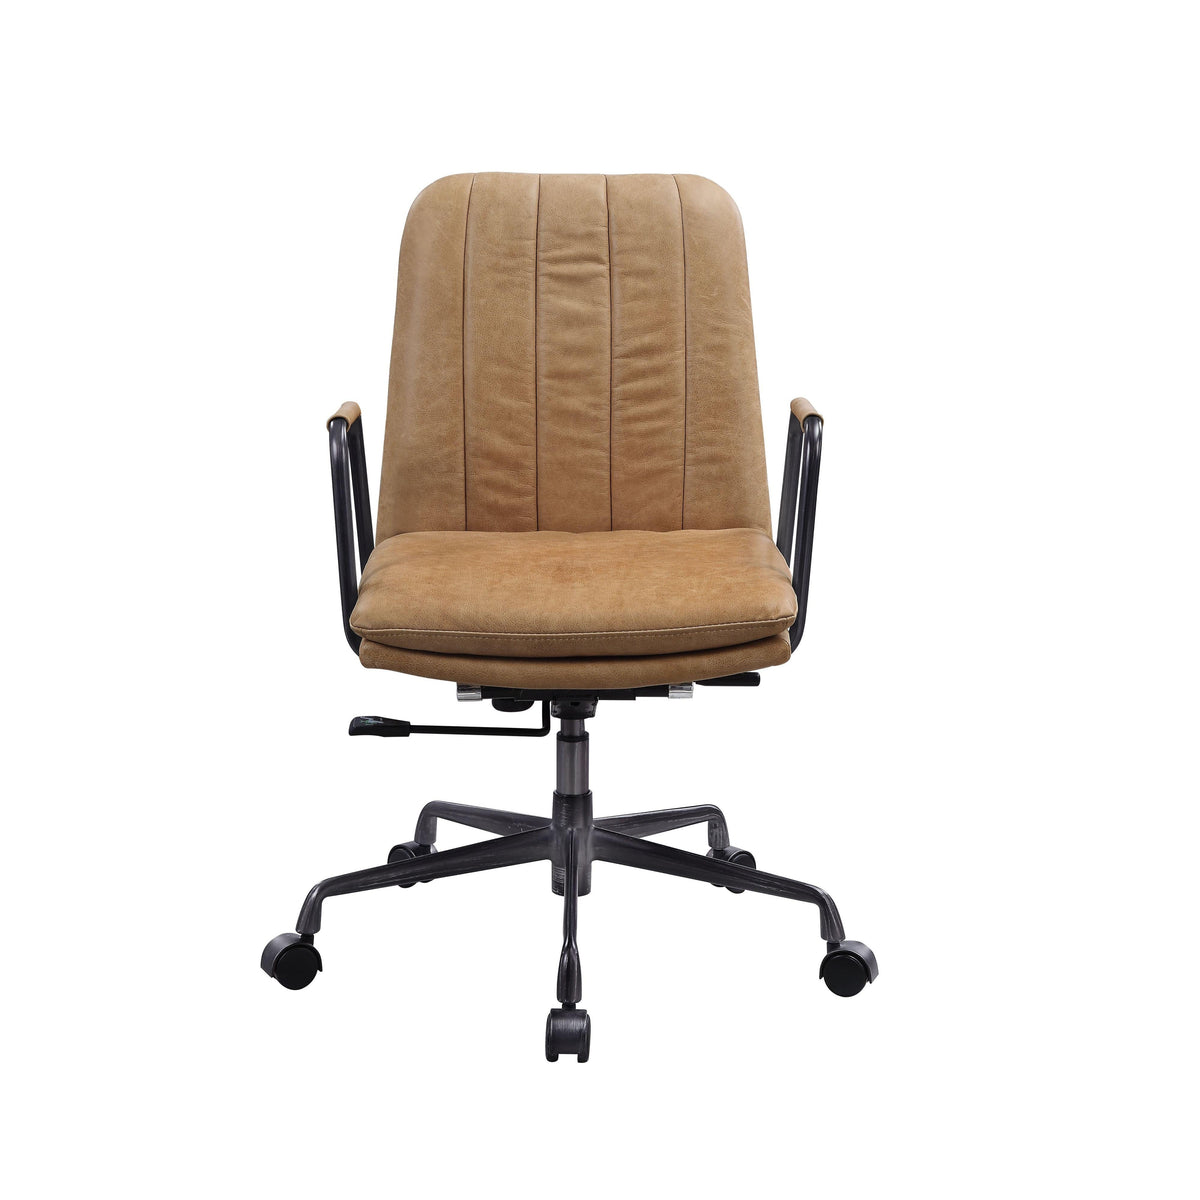 Acme Furniture Eclarn 93174 Office Chair